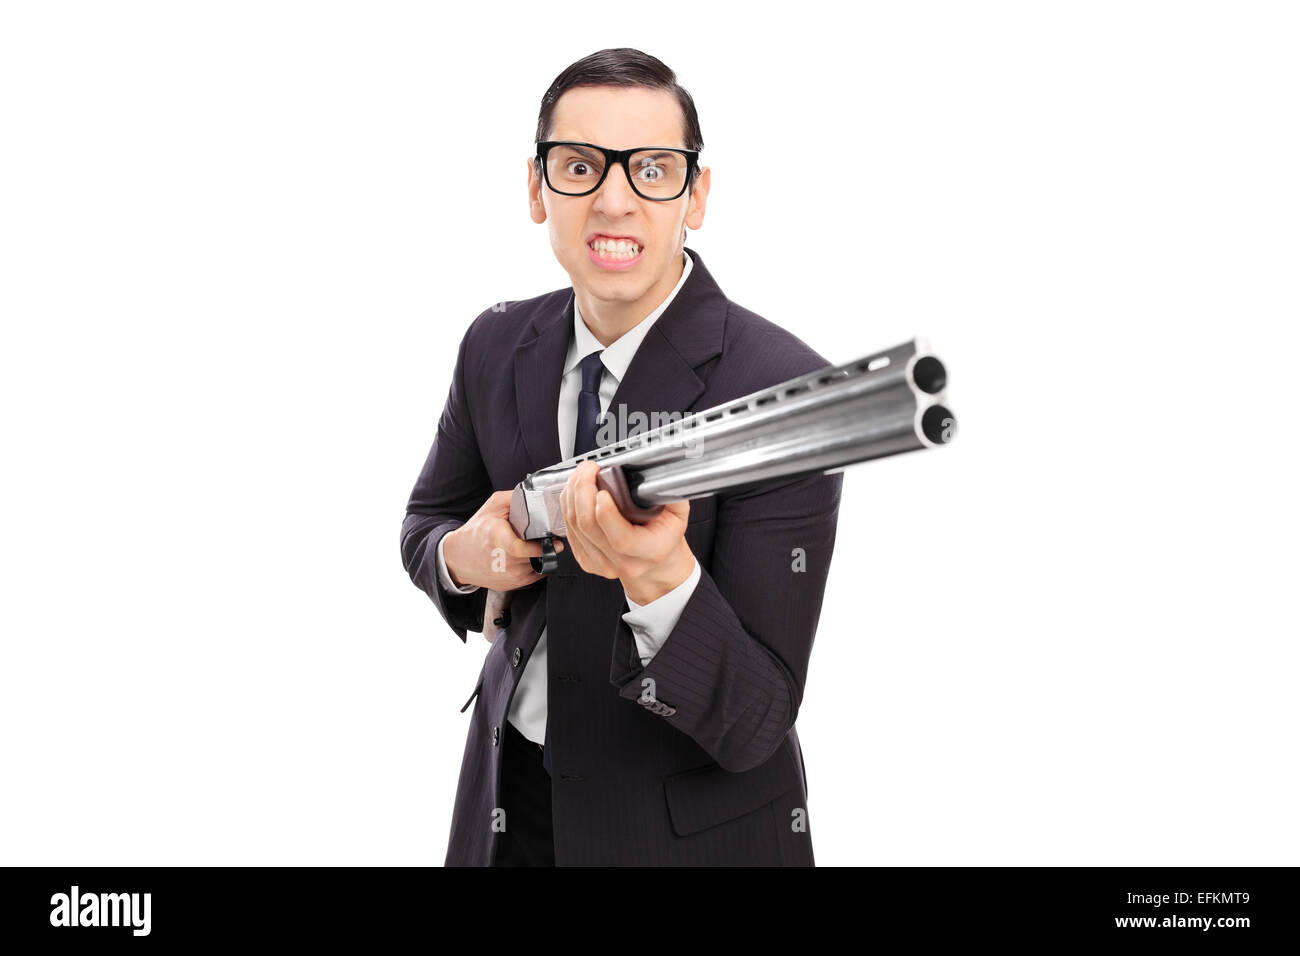 Angry businessman holding a shotgun isolated on white background Stock Photo